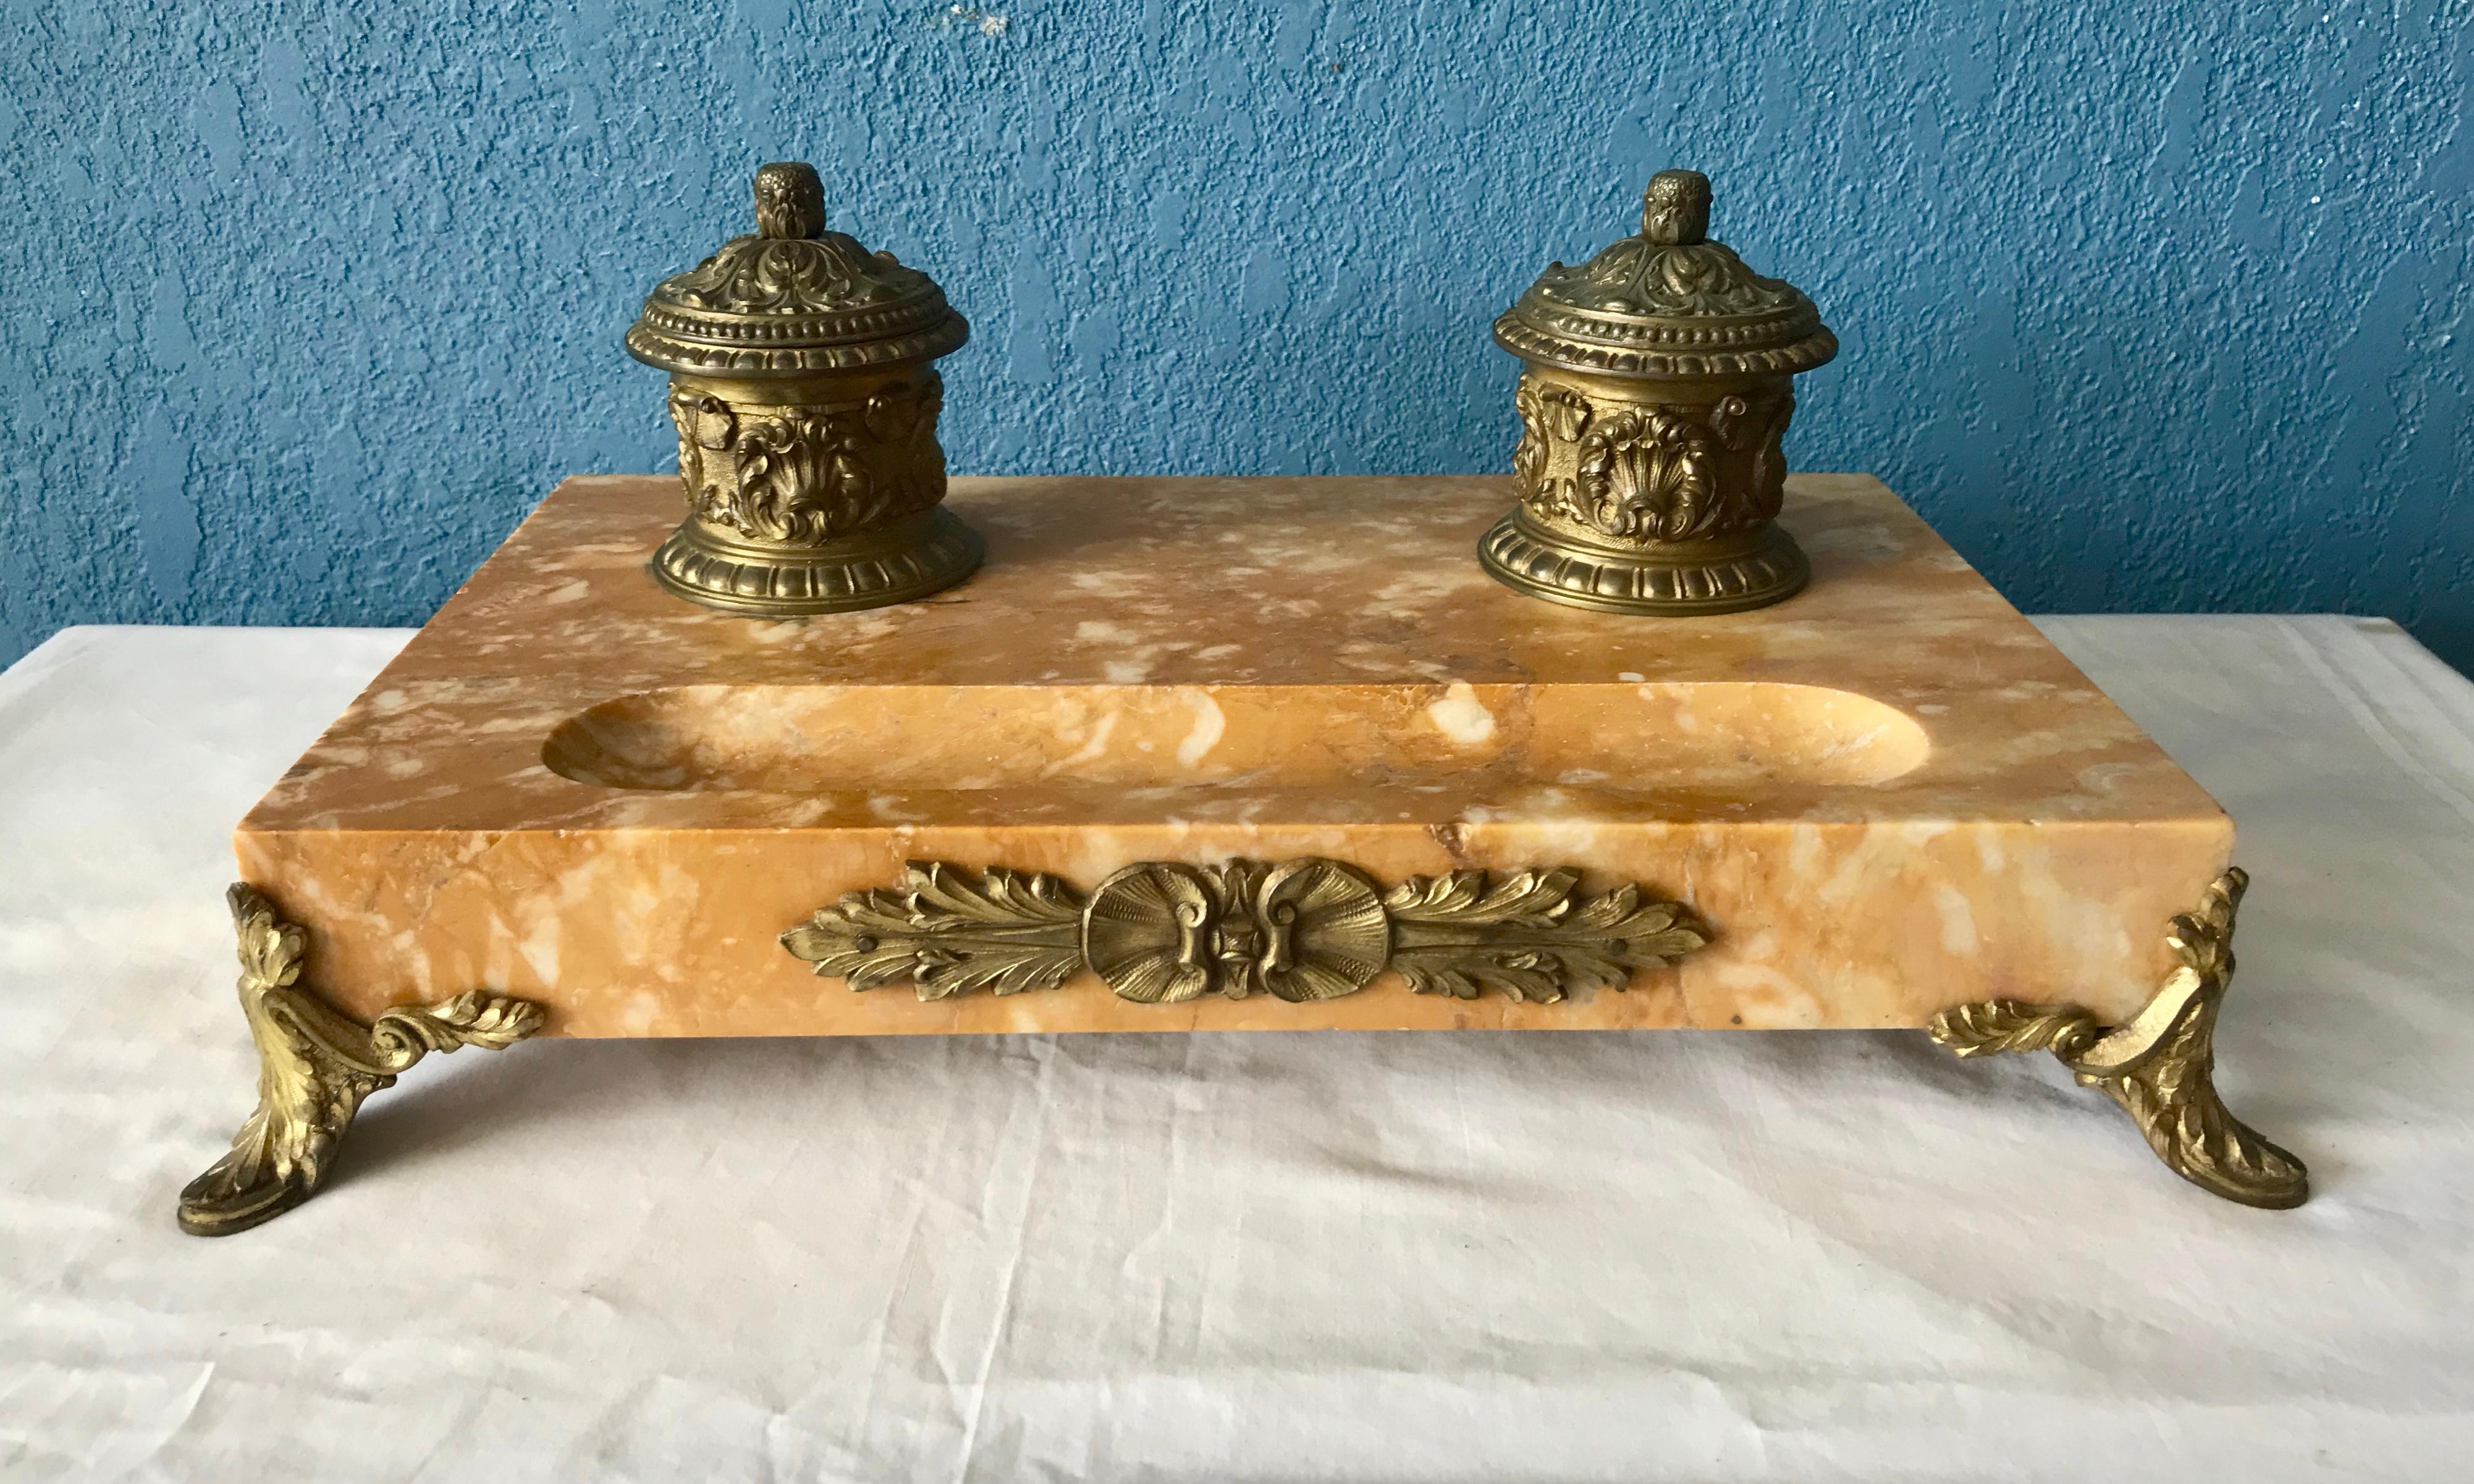 The stand is appointed with bronze inkwells and graceful feet.
Elegantly stylized.